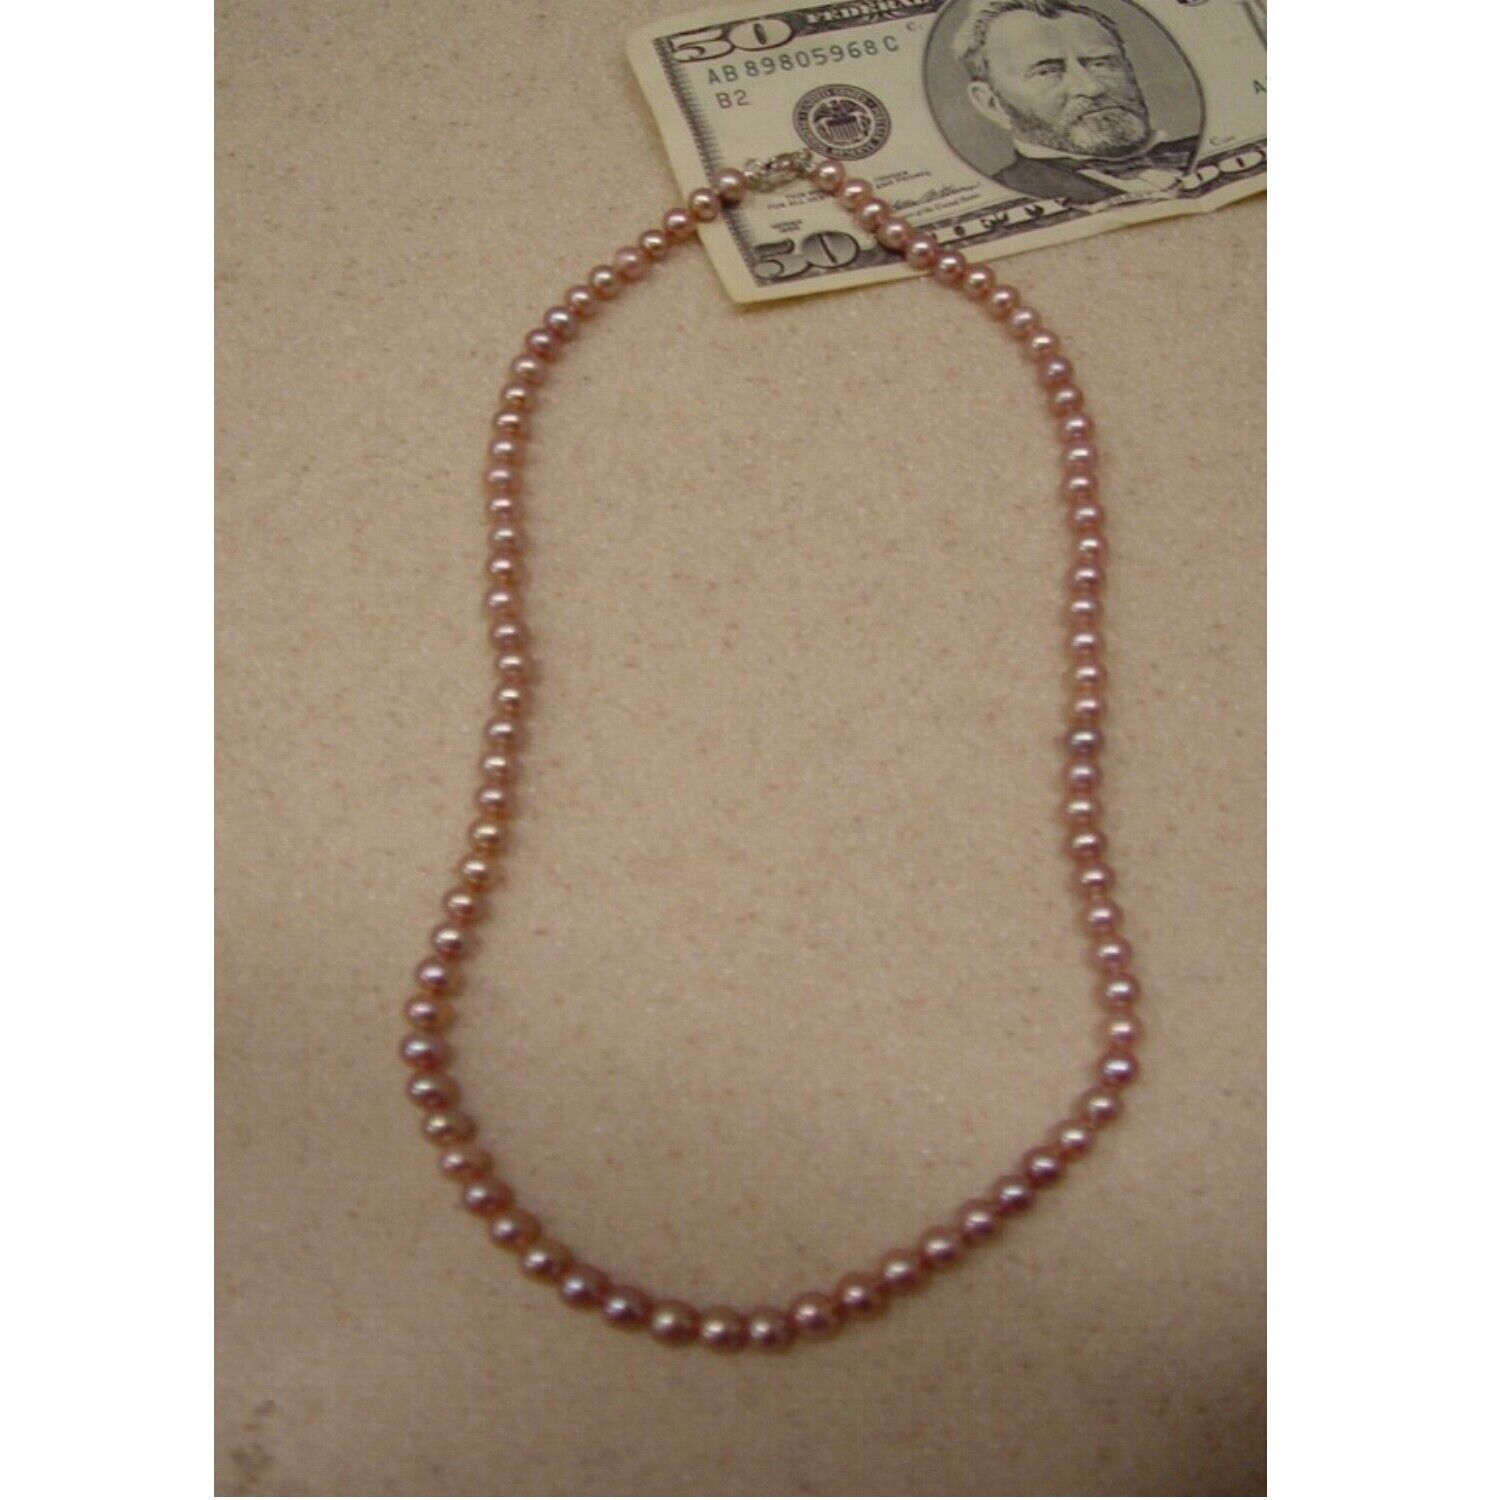 SALE PRICED Genuine Pink Pearl Necklace 17 Inch